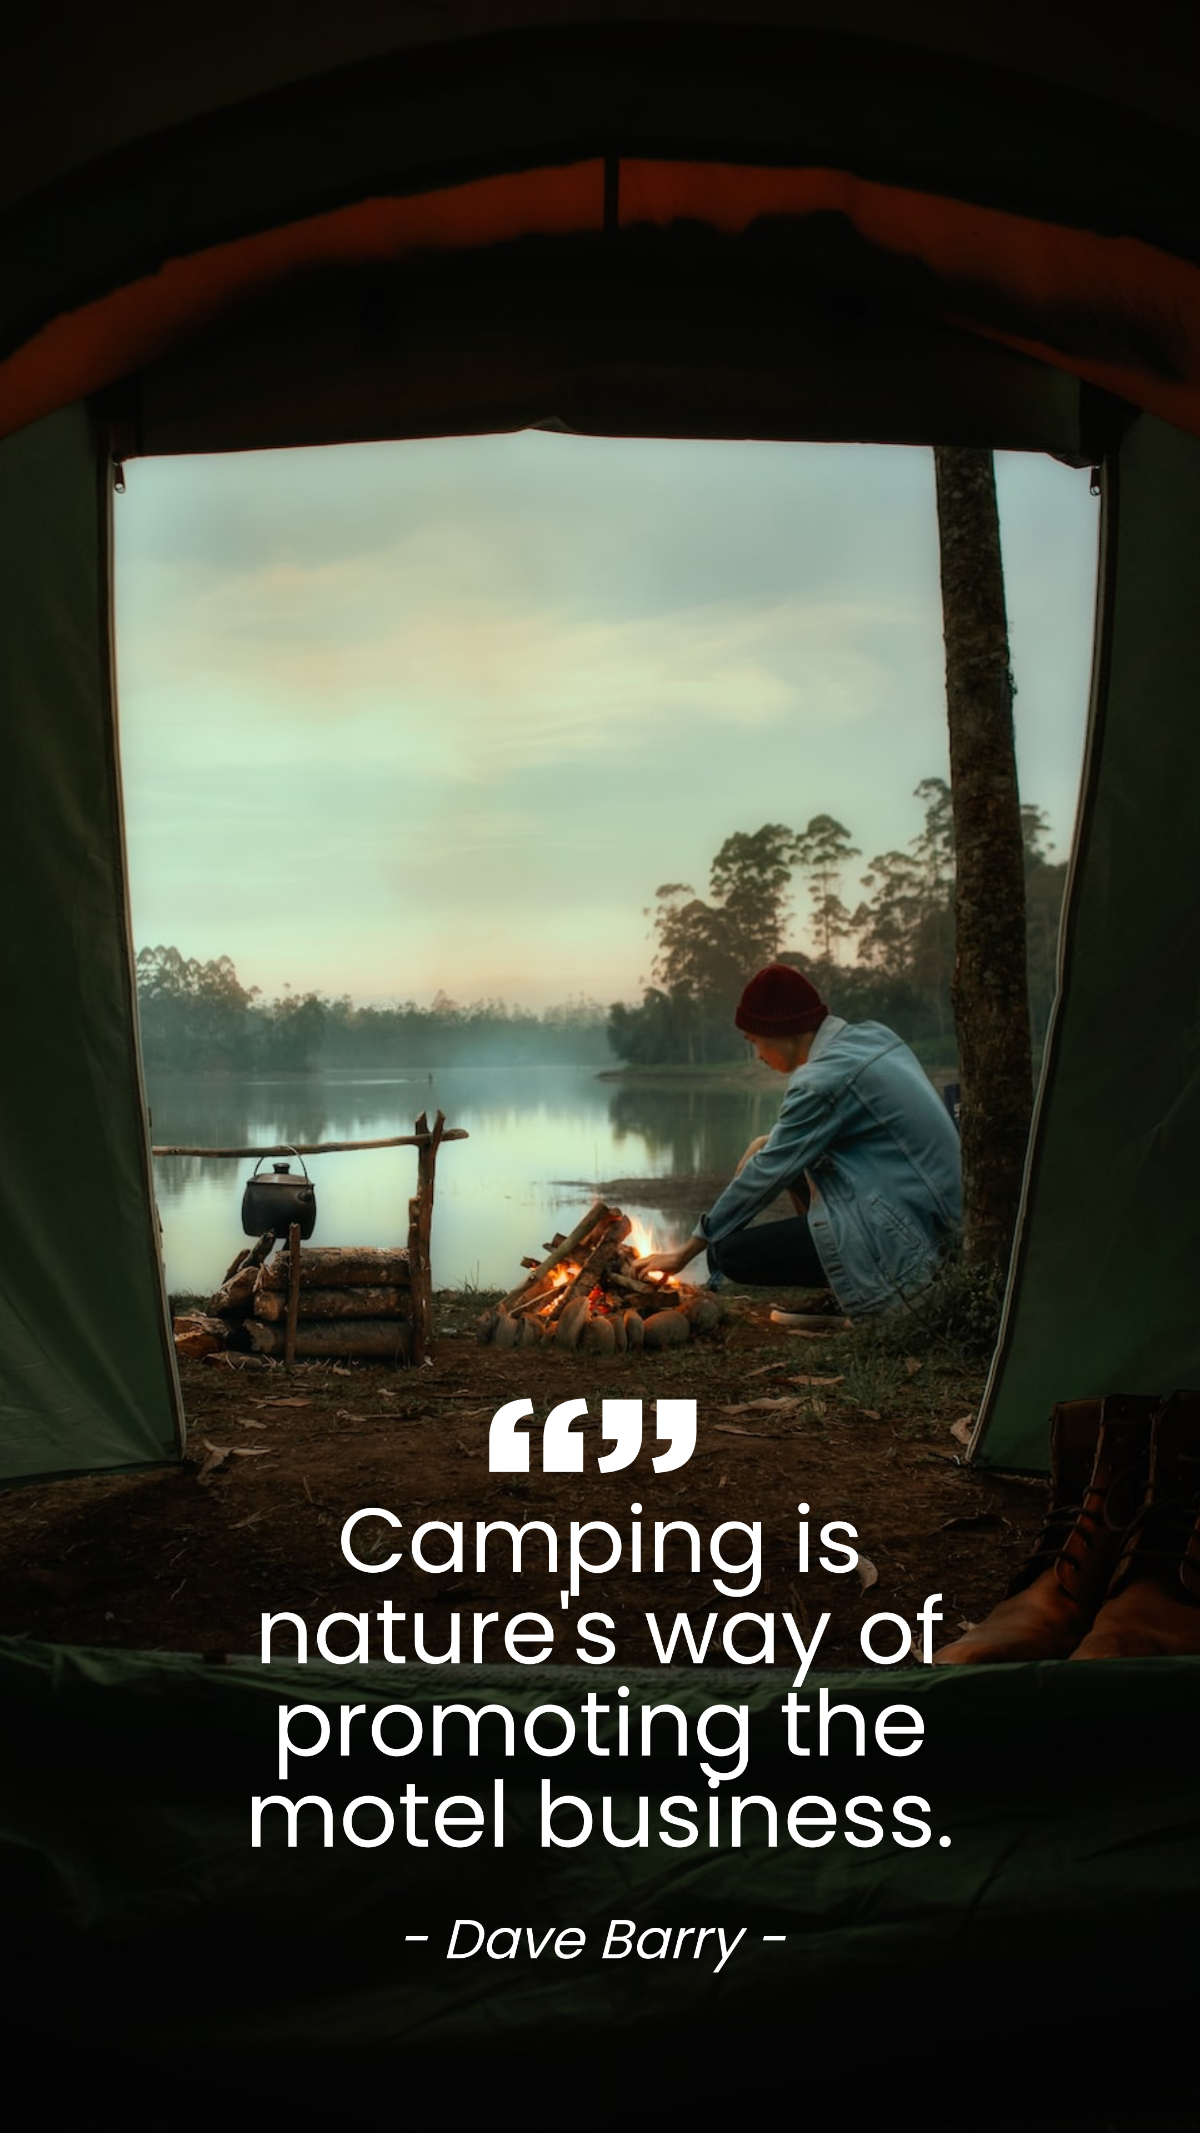 Dave Barry - Camping is nature's way of promoting the motel business. Template